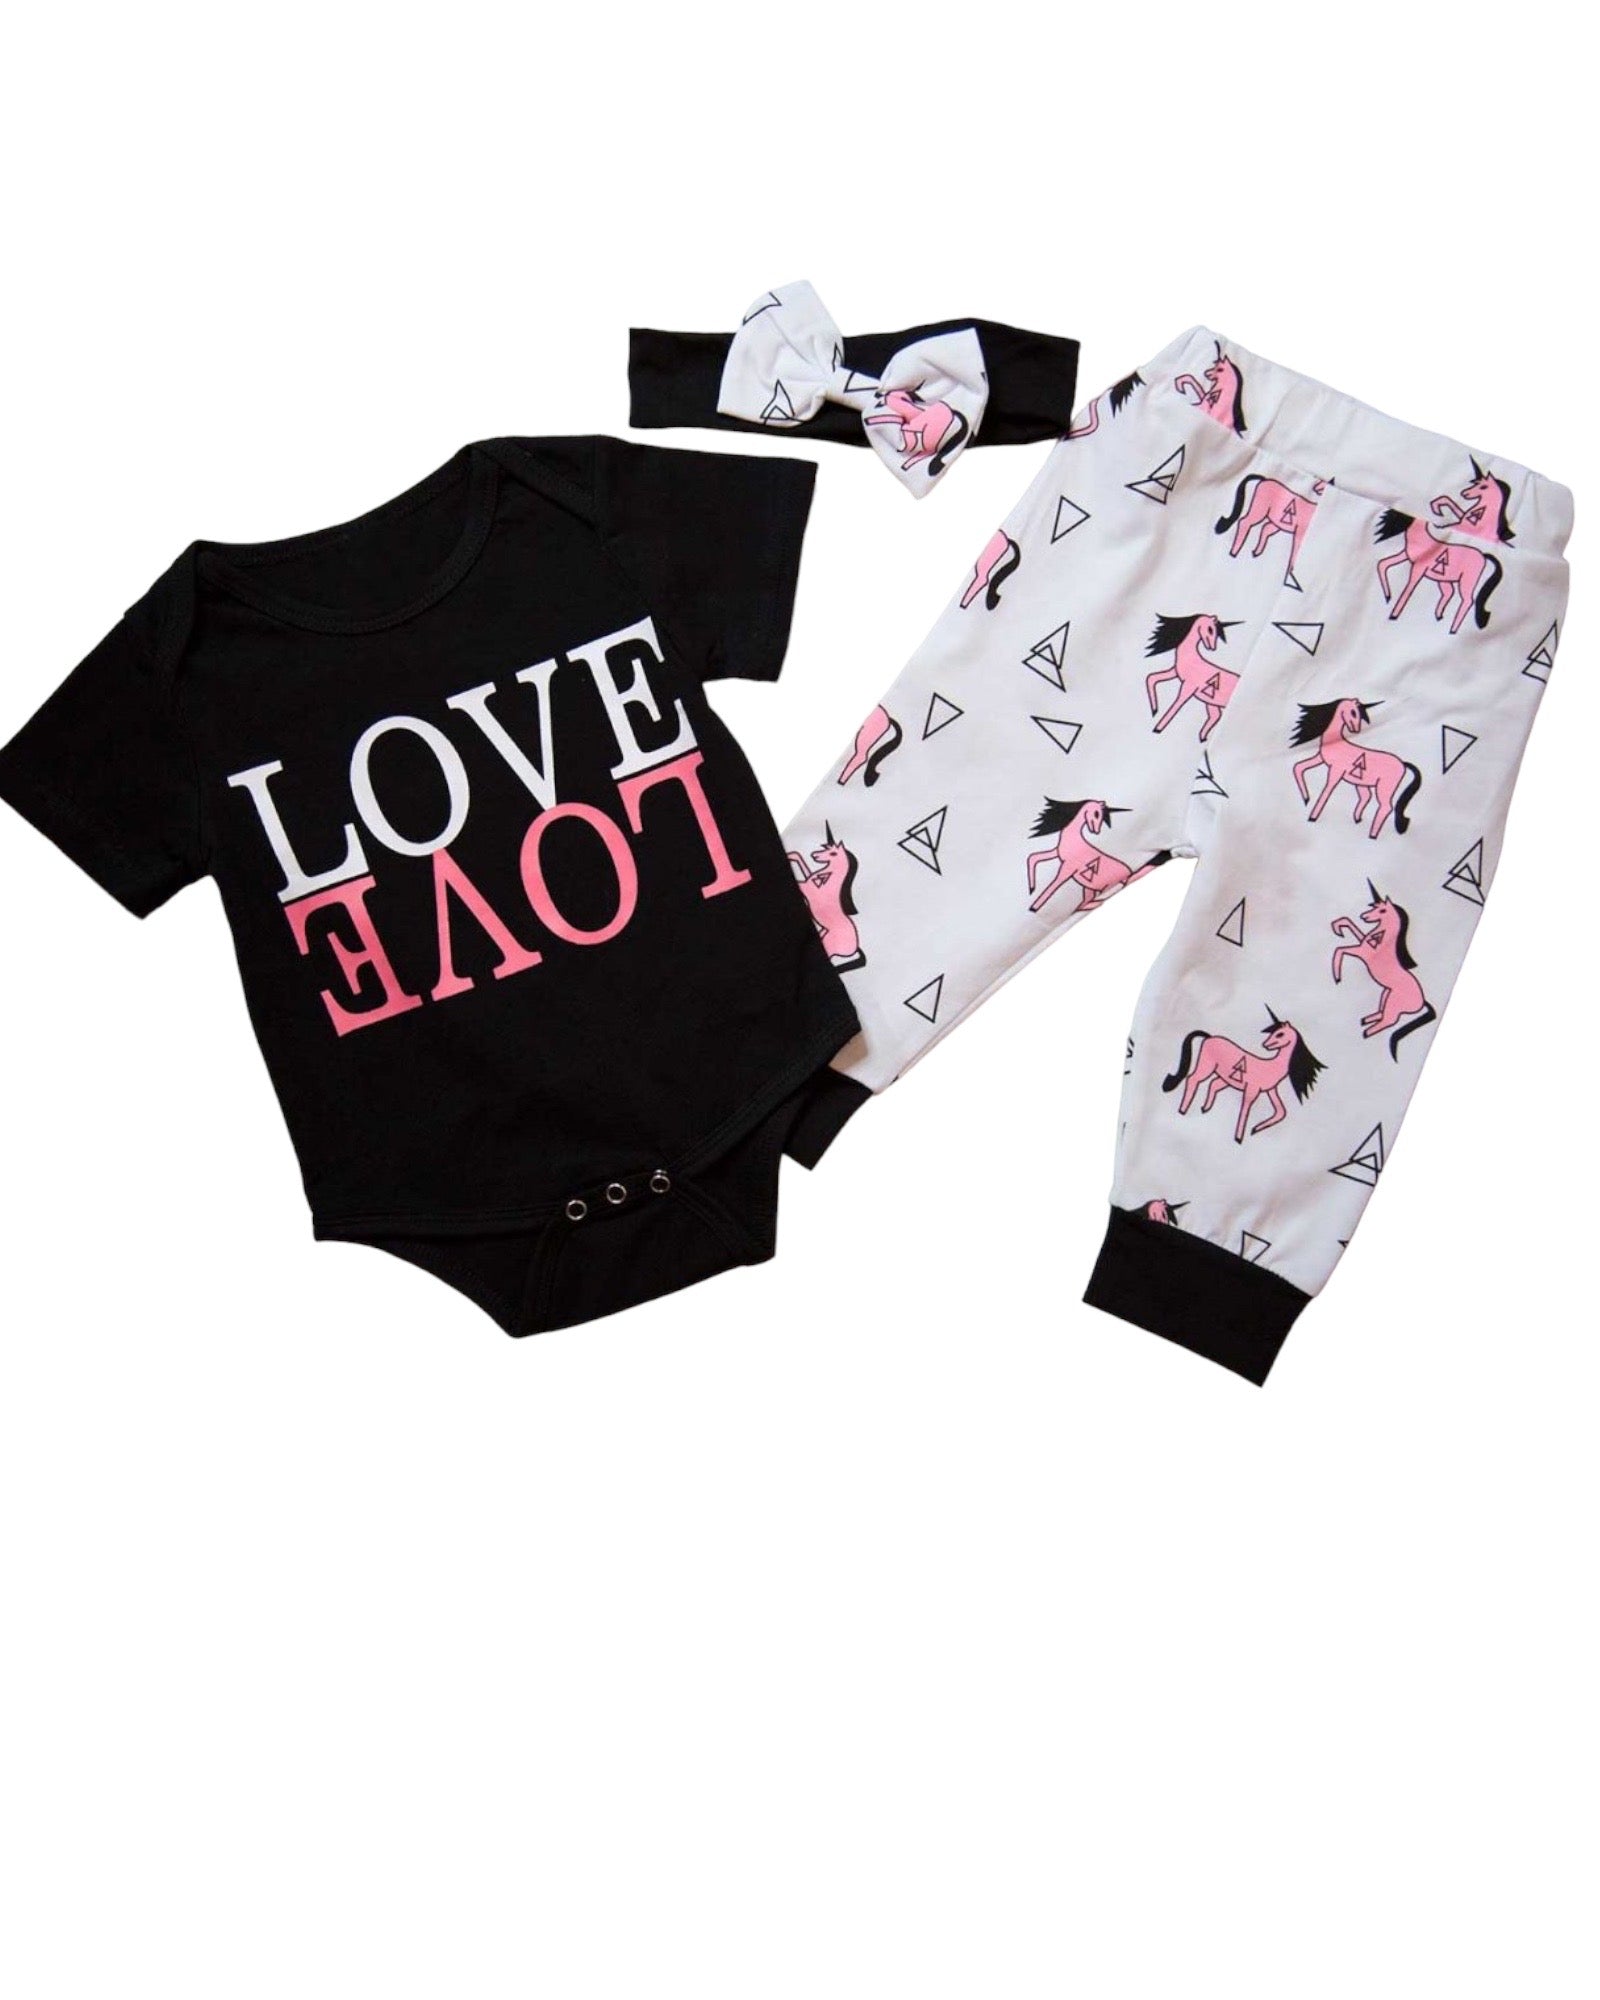 Love And Unicorn Outfit With Matching Headband.